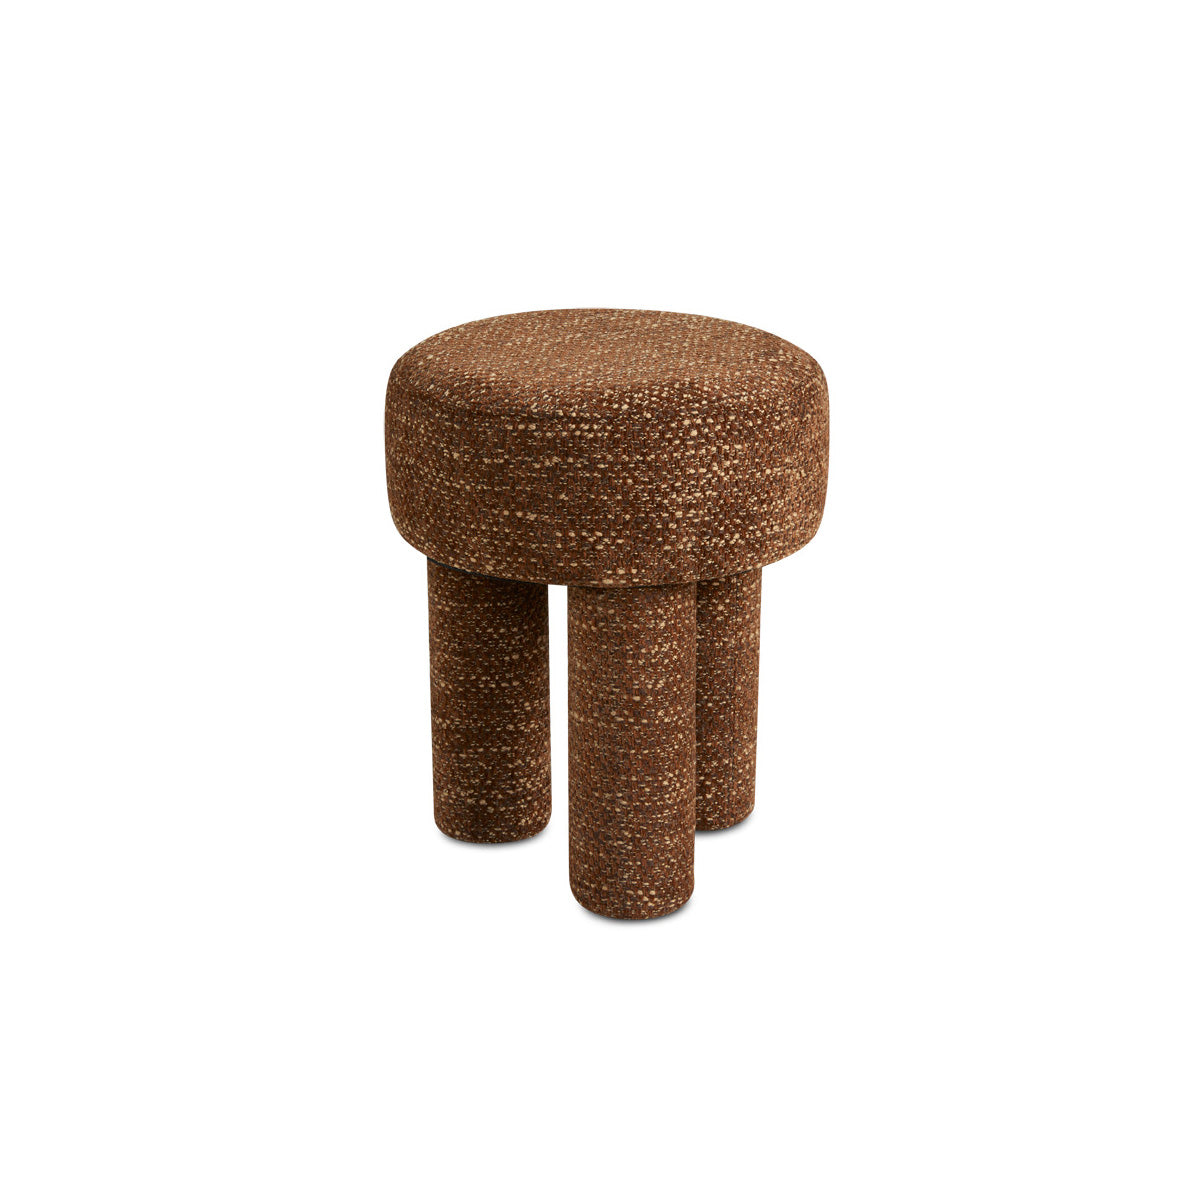 Gerant Stool in Taupe